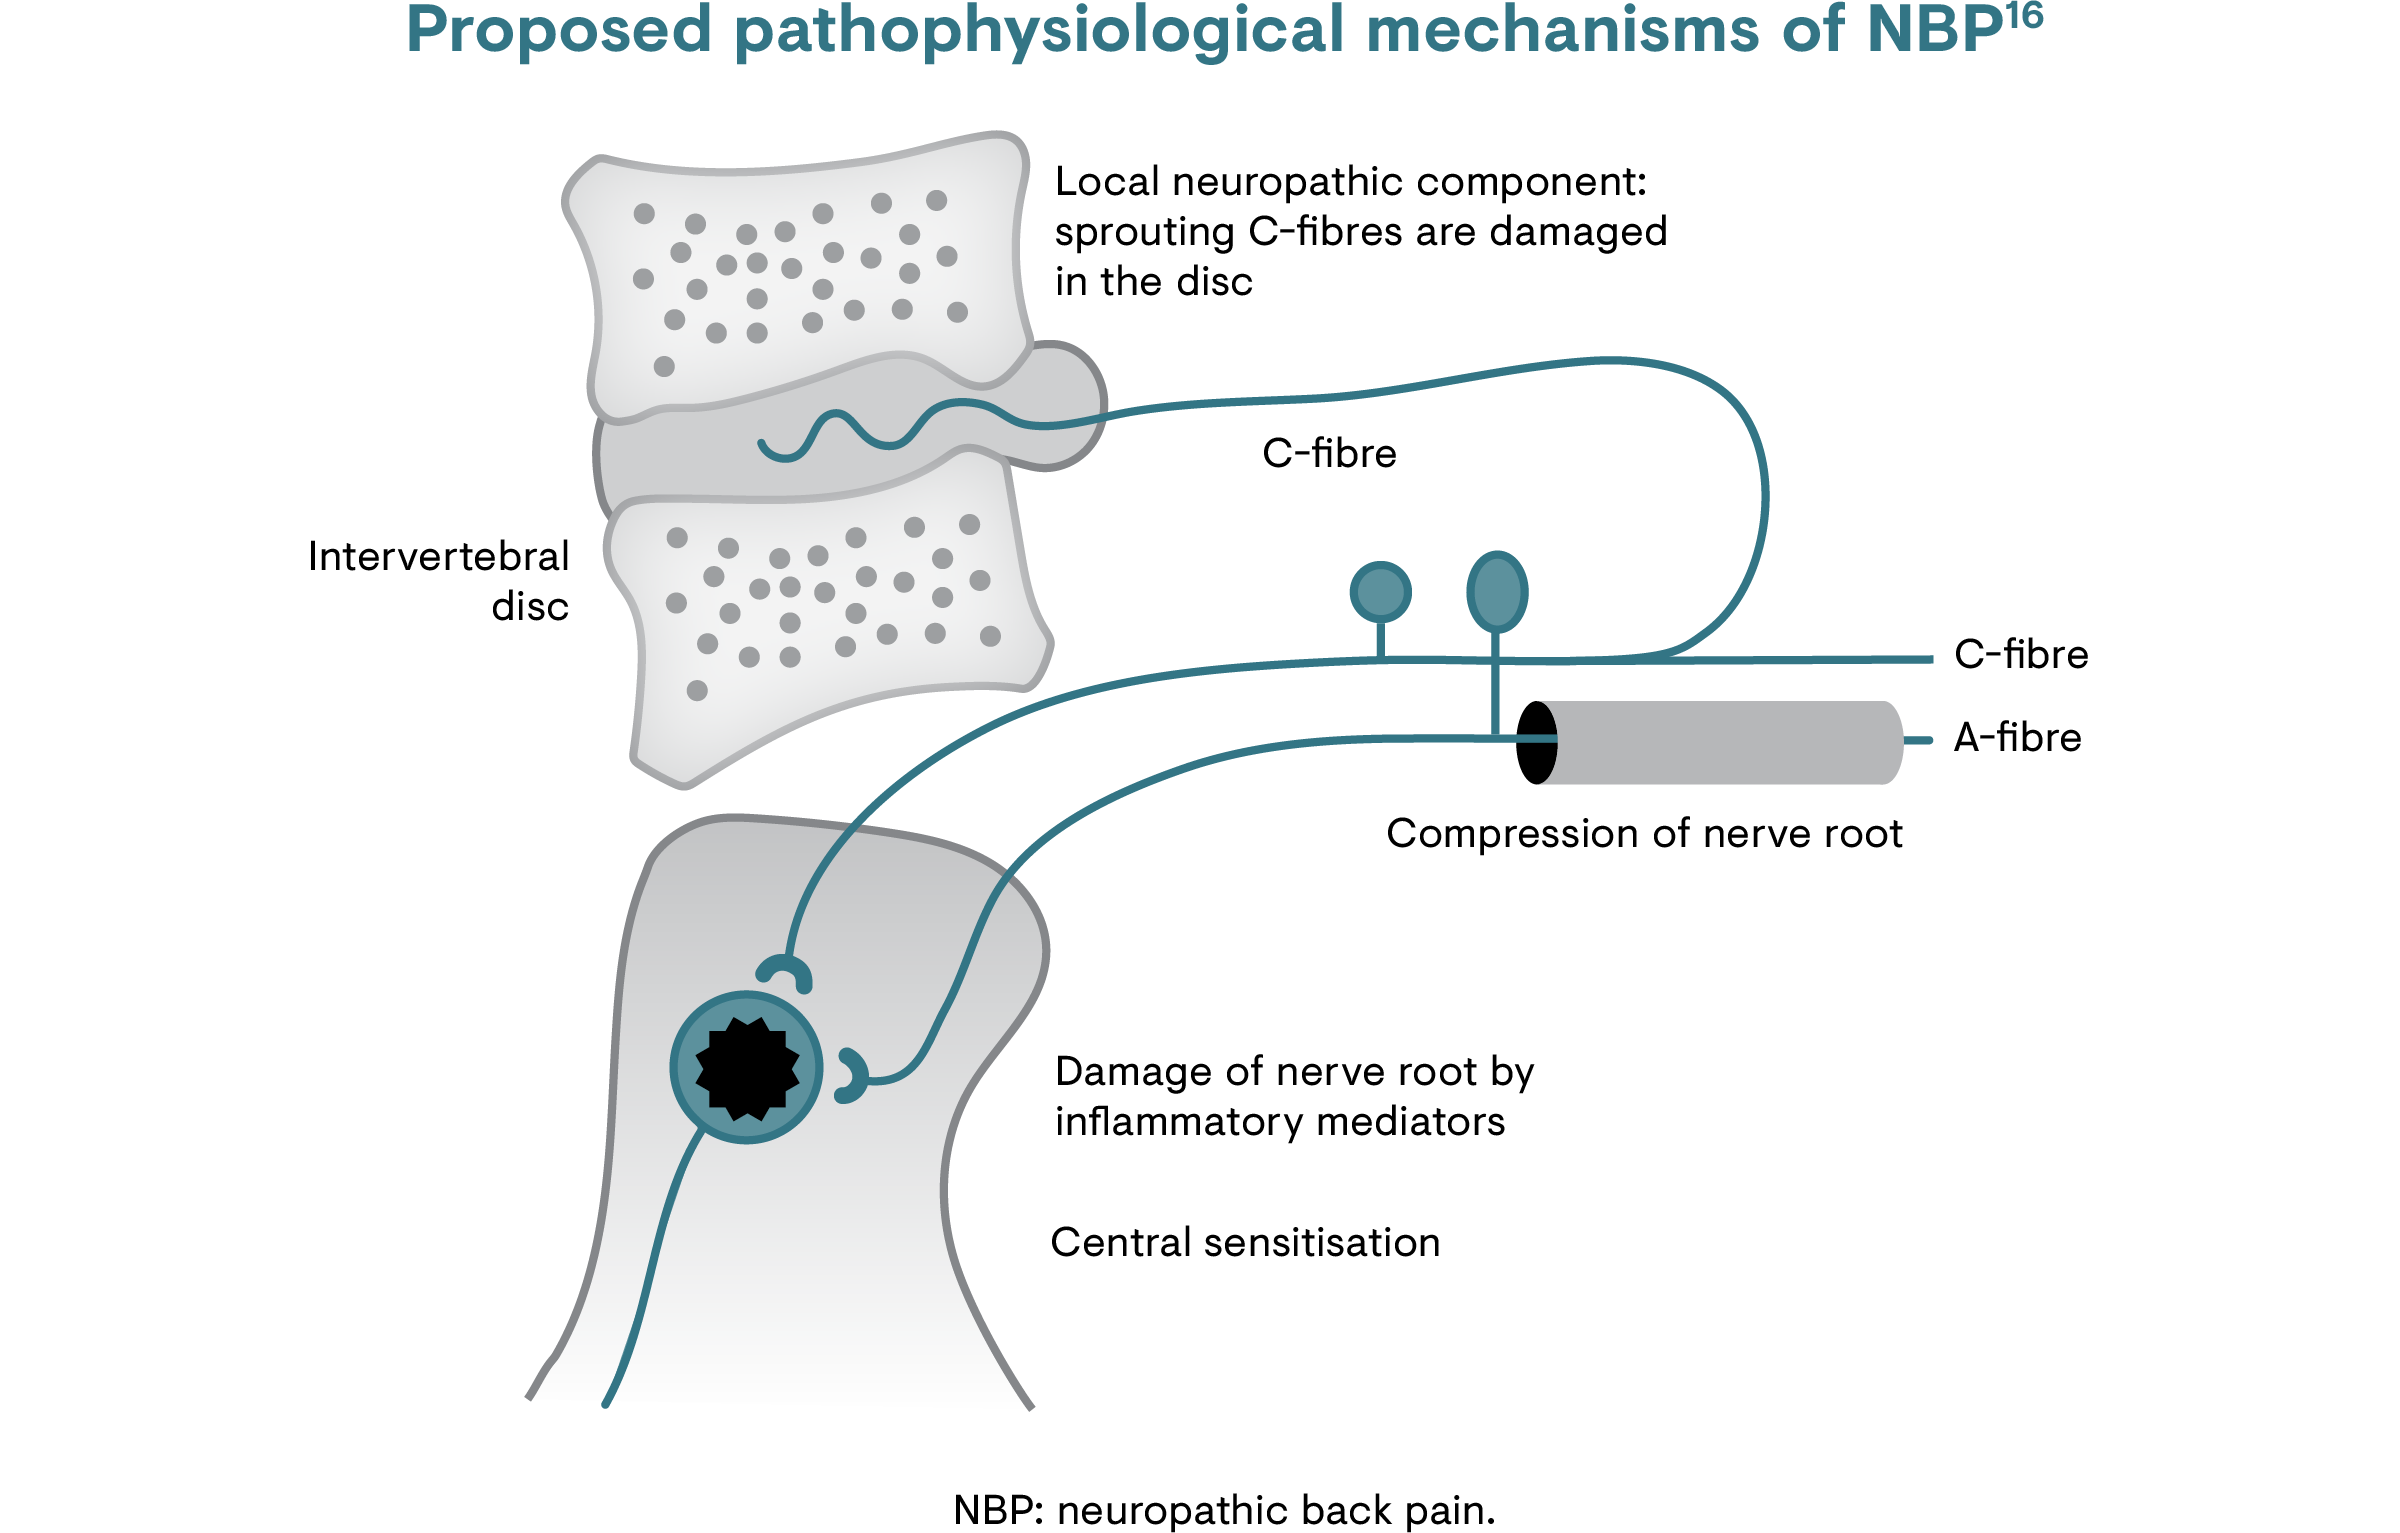 Graphical representation of the proposed pathophysiological mechanism of neuropathic back pain (NBP)